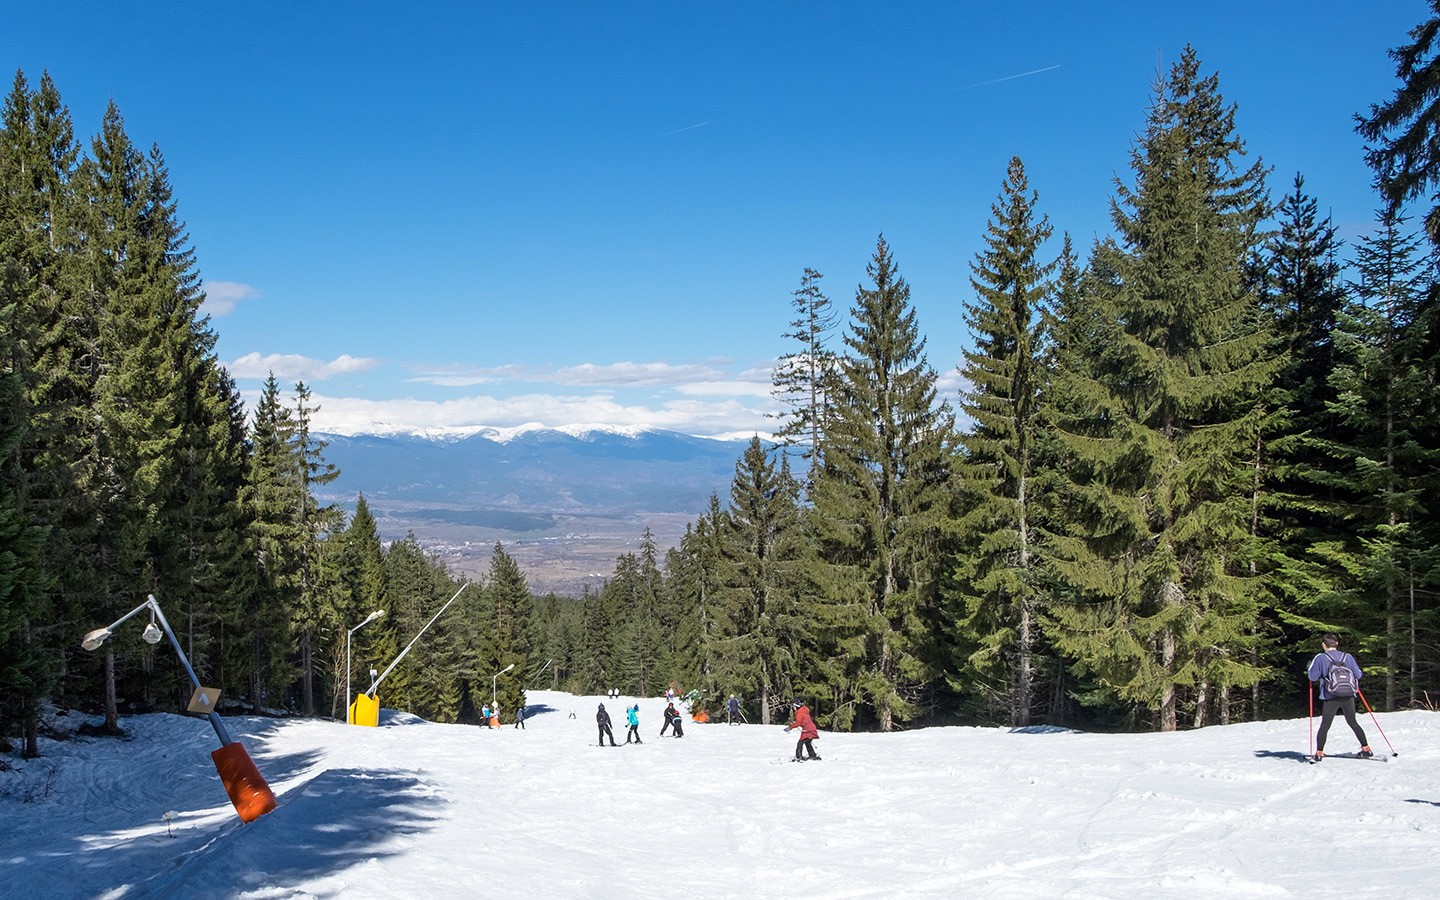 Start Of The Ski Season In Bulgaria – Over 1.2 Million Foreign Tourists Are Expected